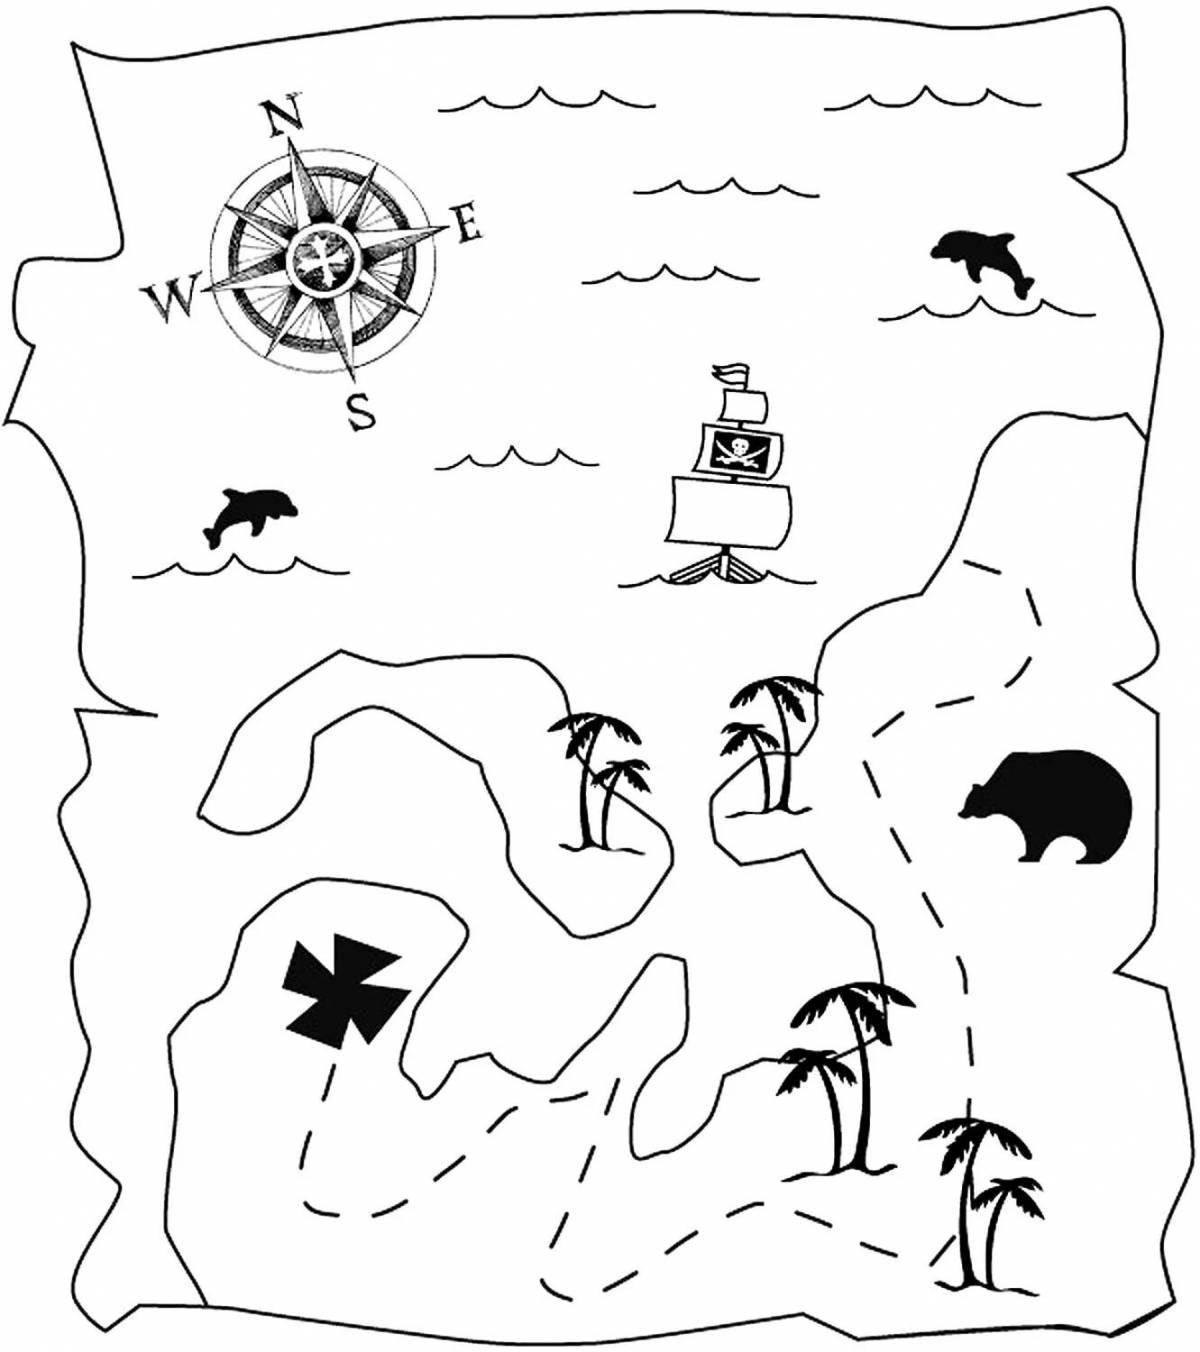 Pirate treasure map coloring page